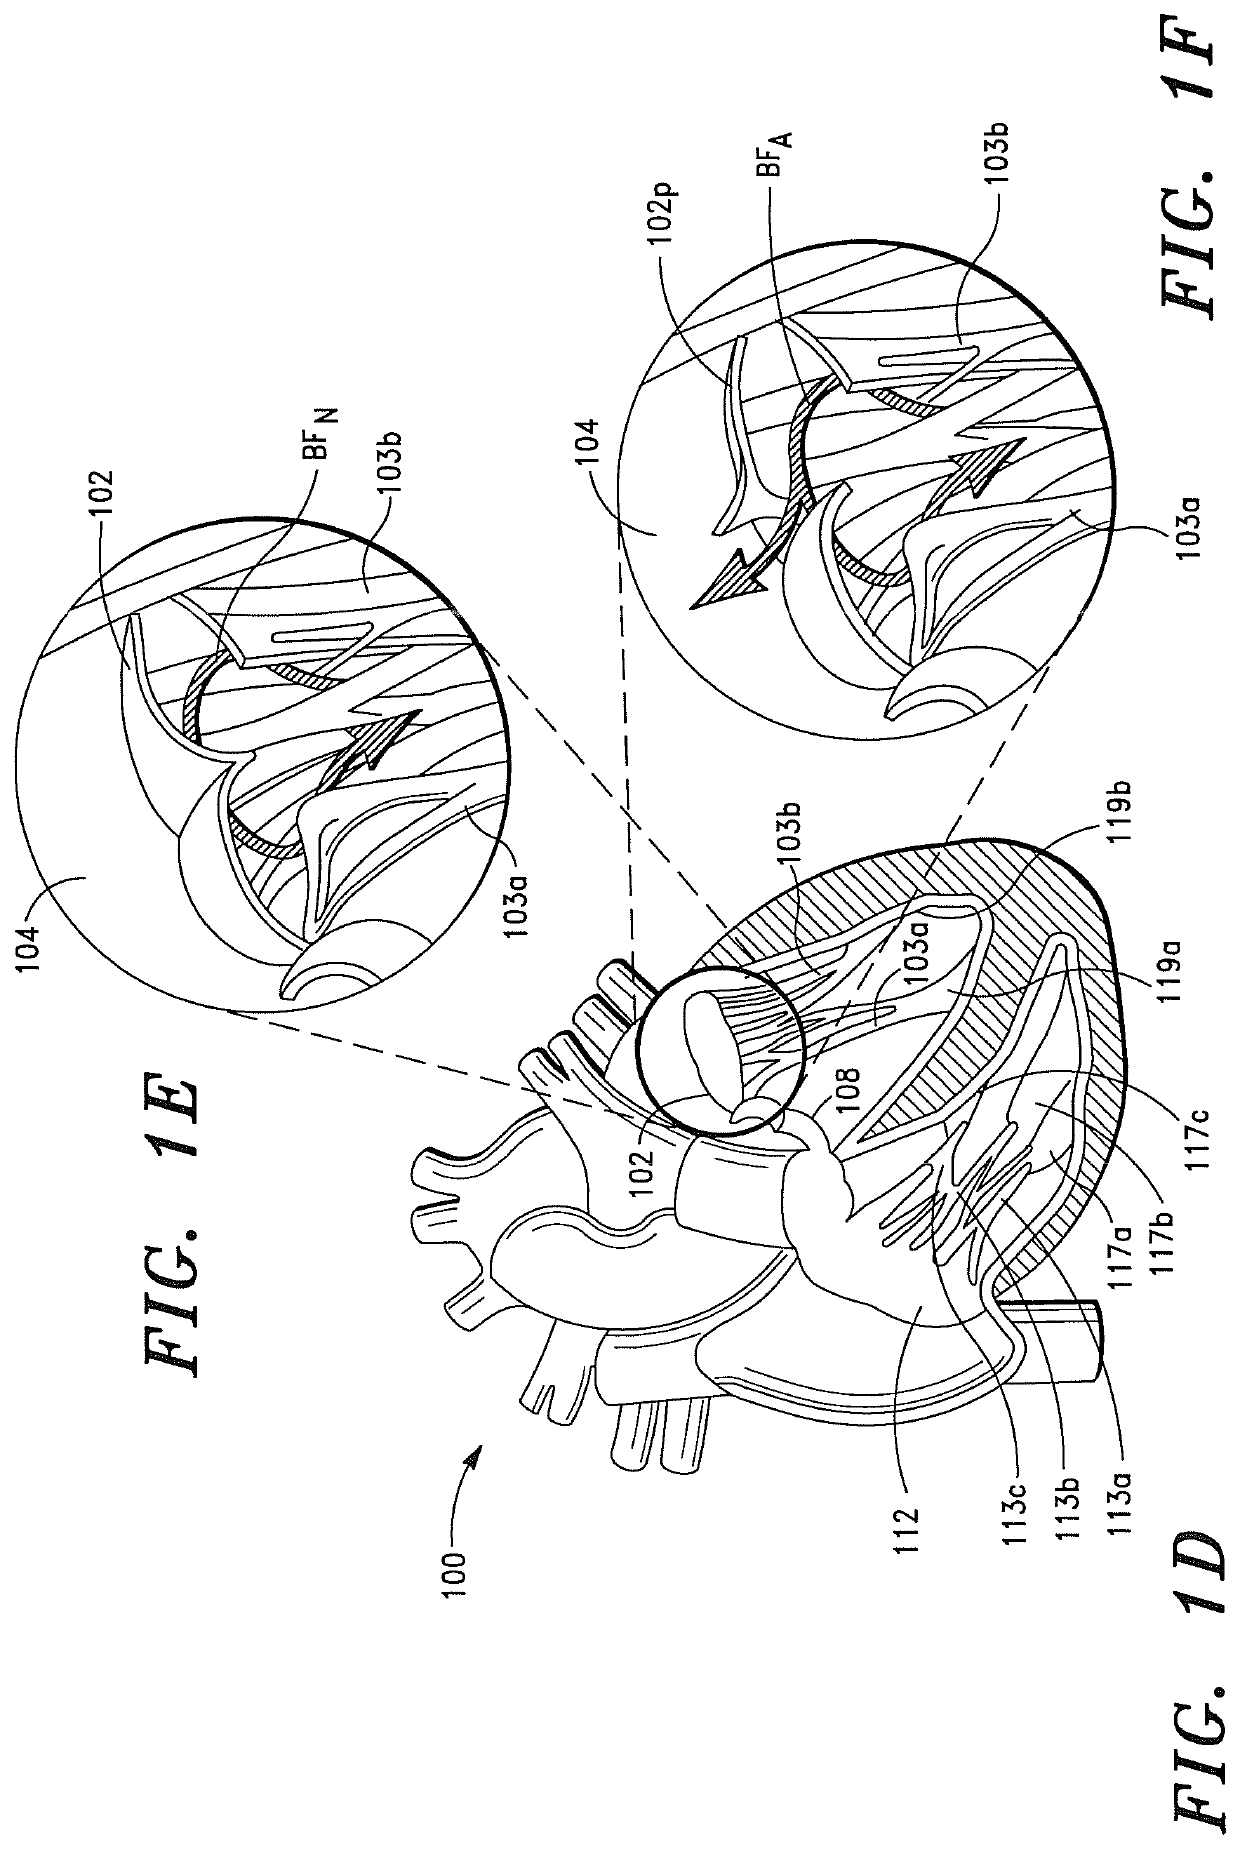 Prosthetic cardiovascular valves and methods for replacing native atrioventricular valves with same